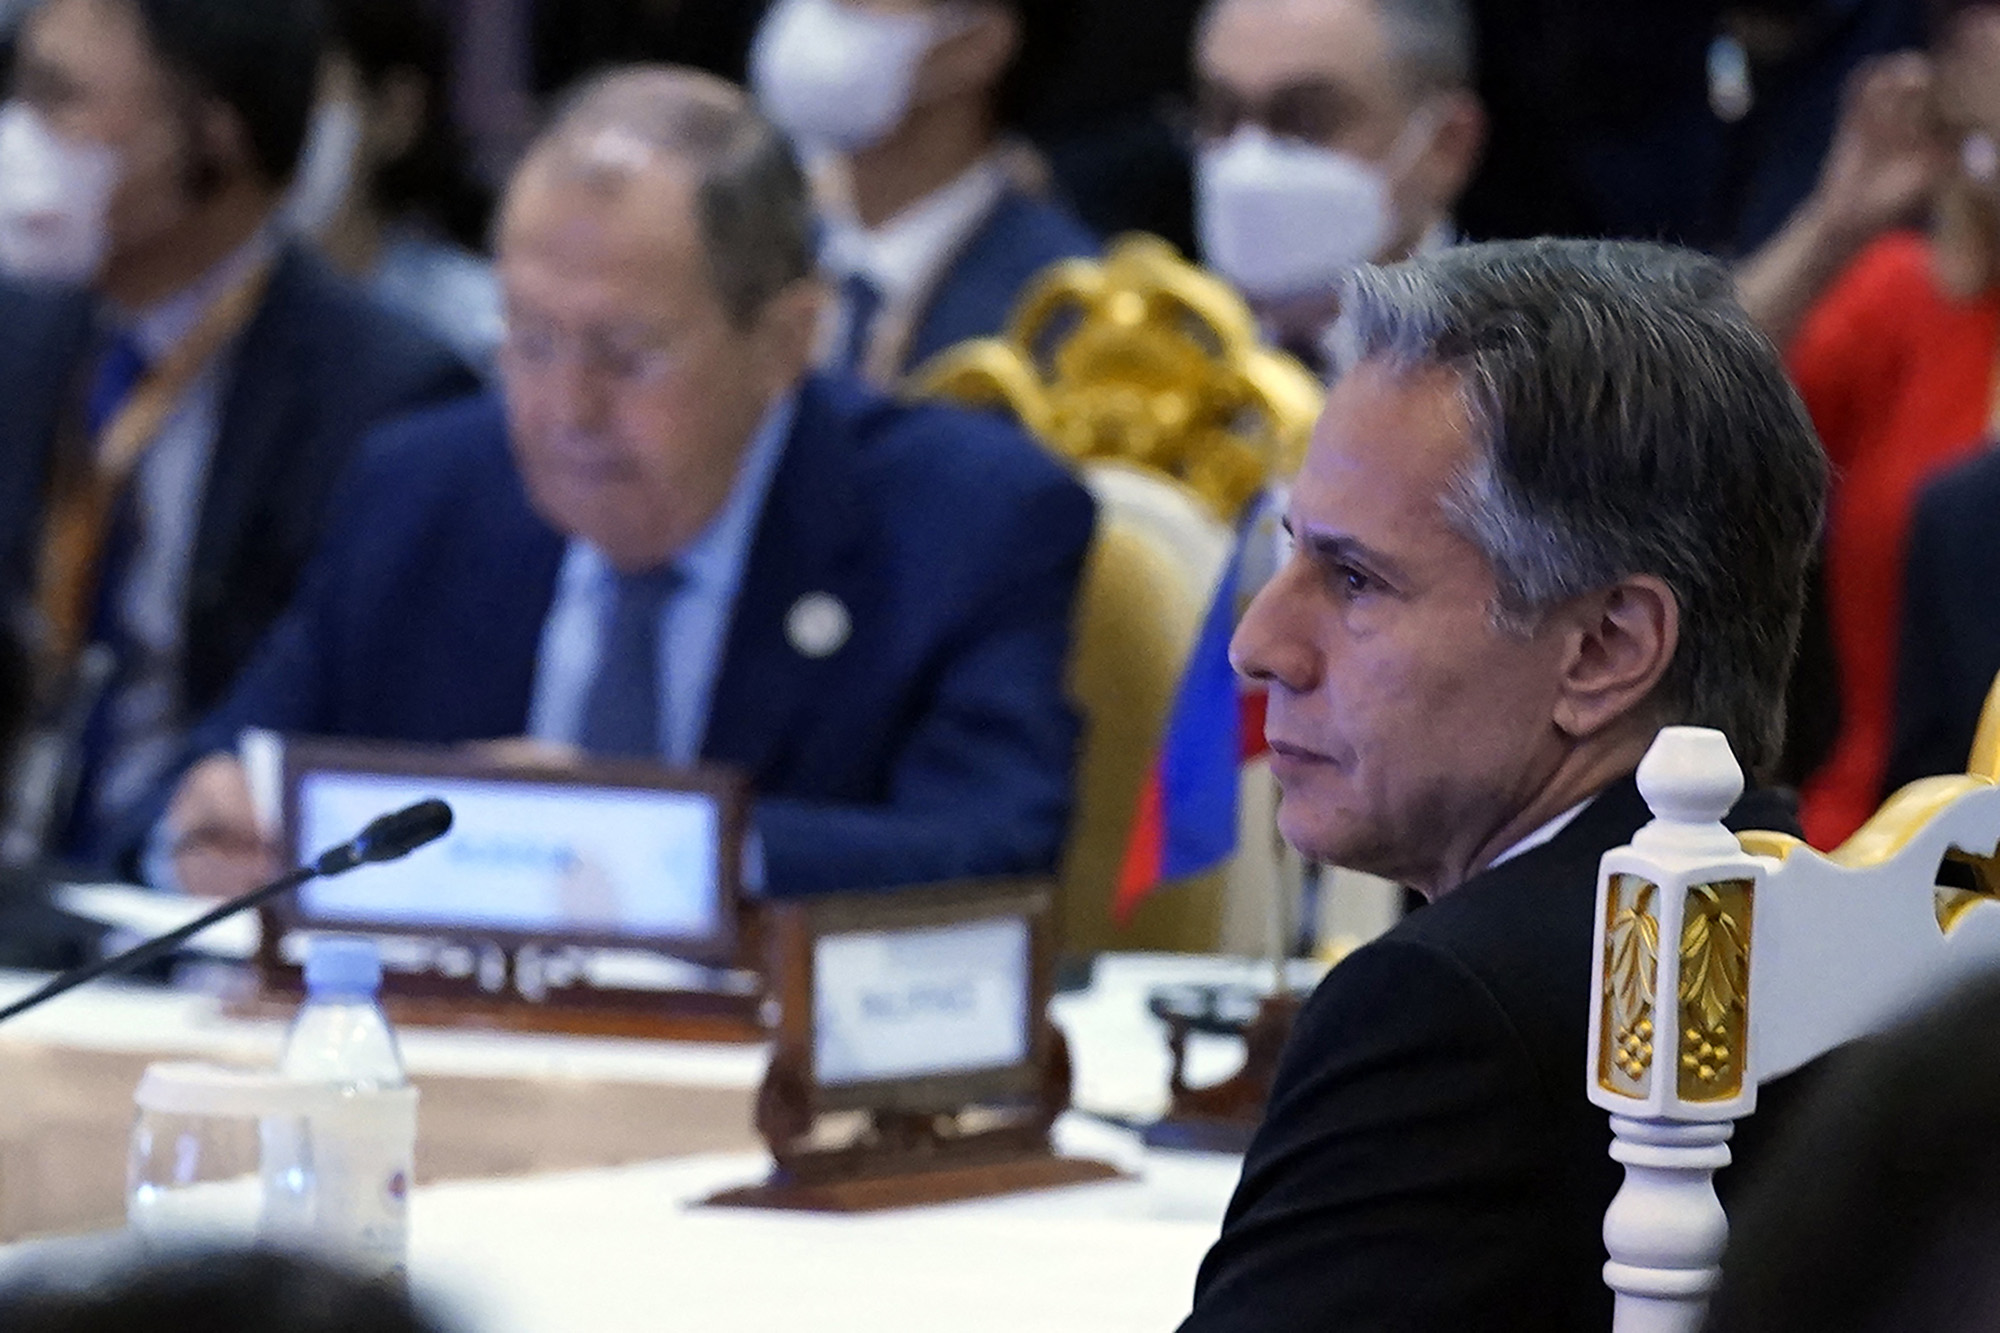 US Secretary of State Antony Blinken, right and Russia's Foreign Minister Sergey Lavrov, left, attend the East Asia Summit Foreign Ministers meeting during the 55th ASEAN Foreign Ministers' Meeting in Phnom Penh on August 5.